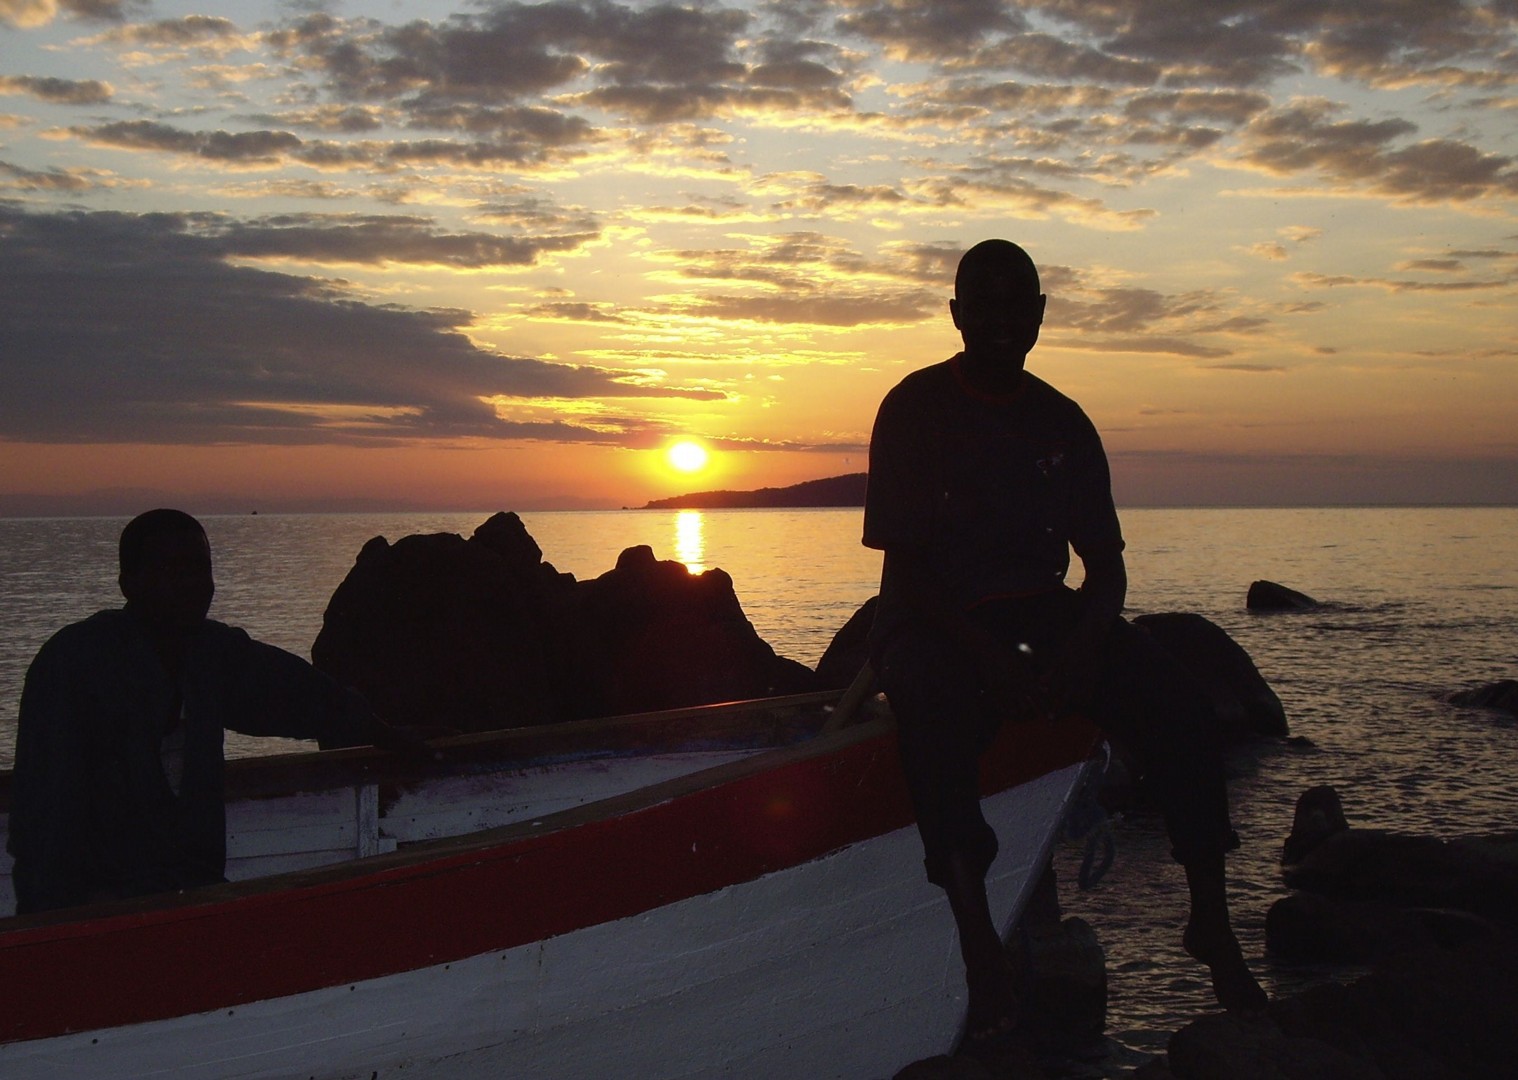 Sunset by the boats on Lake Malawi - Malawi - Meet the People Tours